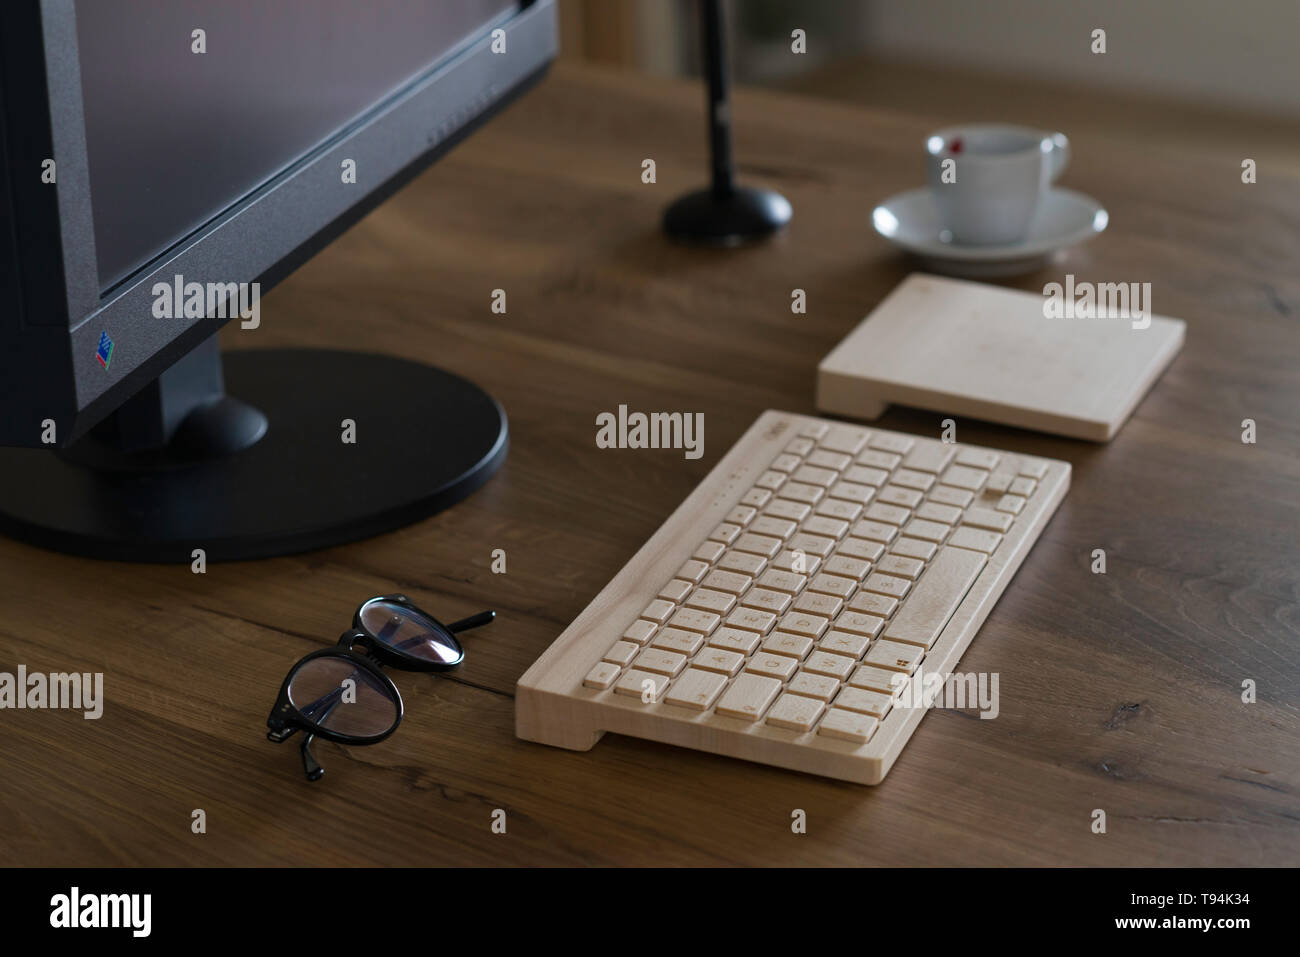 Modena, Italy, 04/07/2018 : Office table desk. Workspace with large black  monitor screen, a wooden keyboard, a trackpad, a graphic pen, glasses, a  cof Stock Photo - Alamy